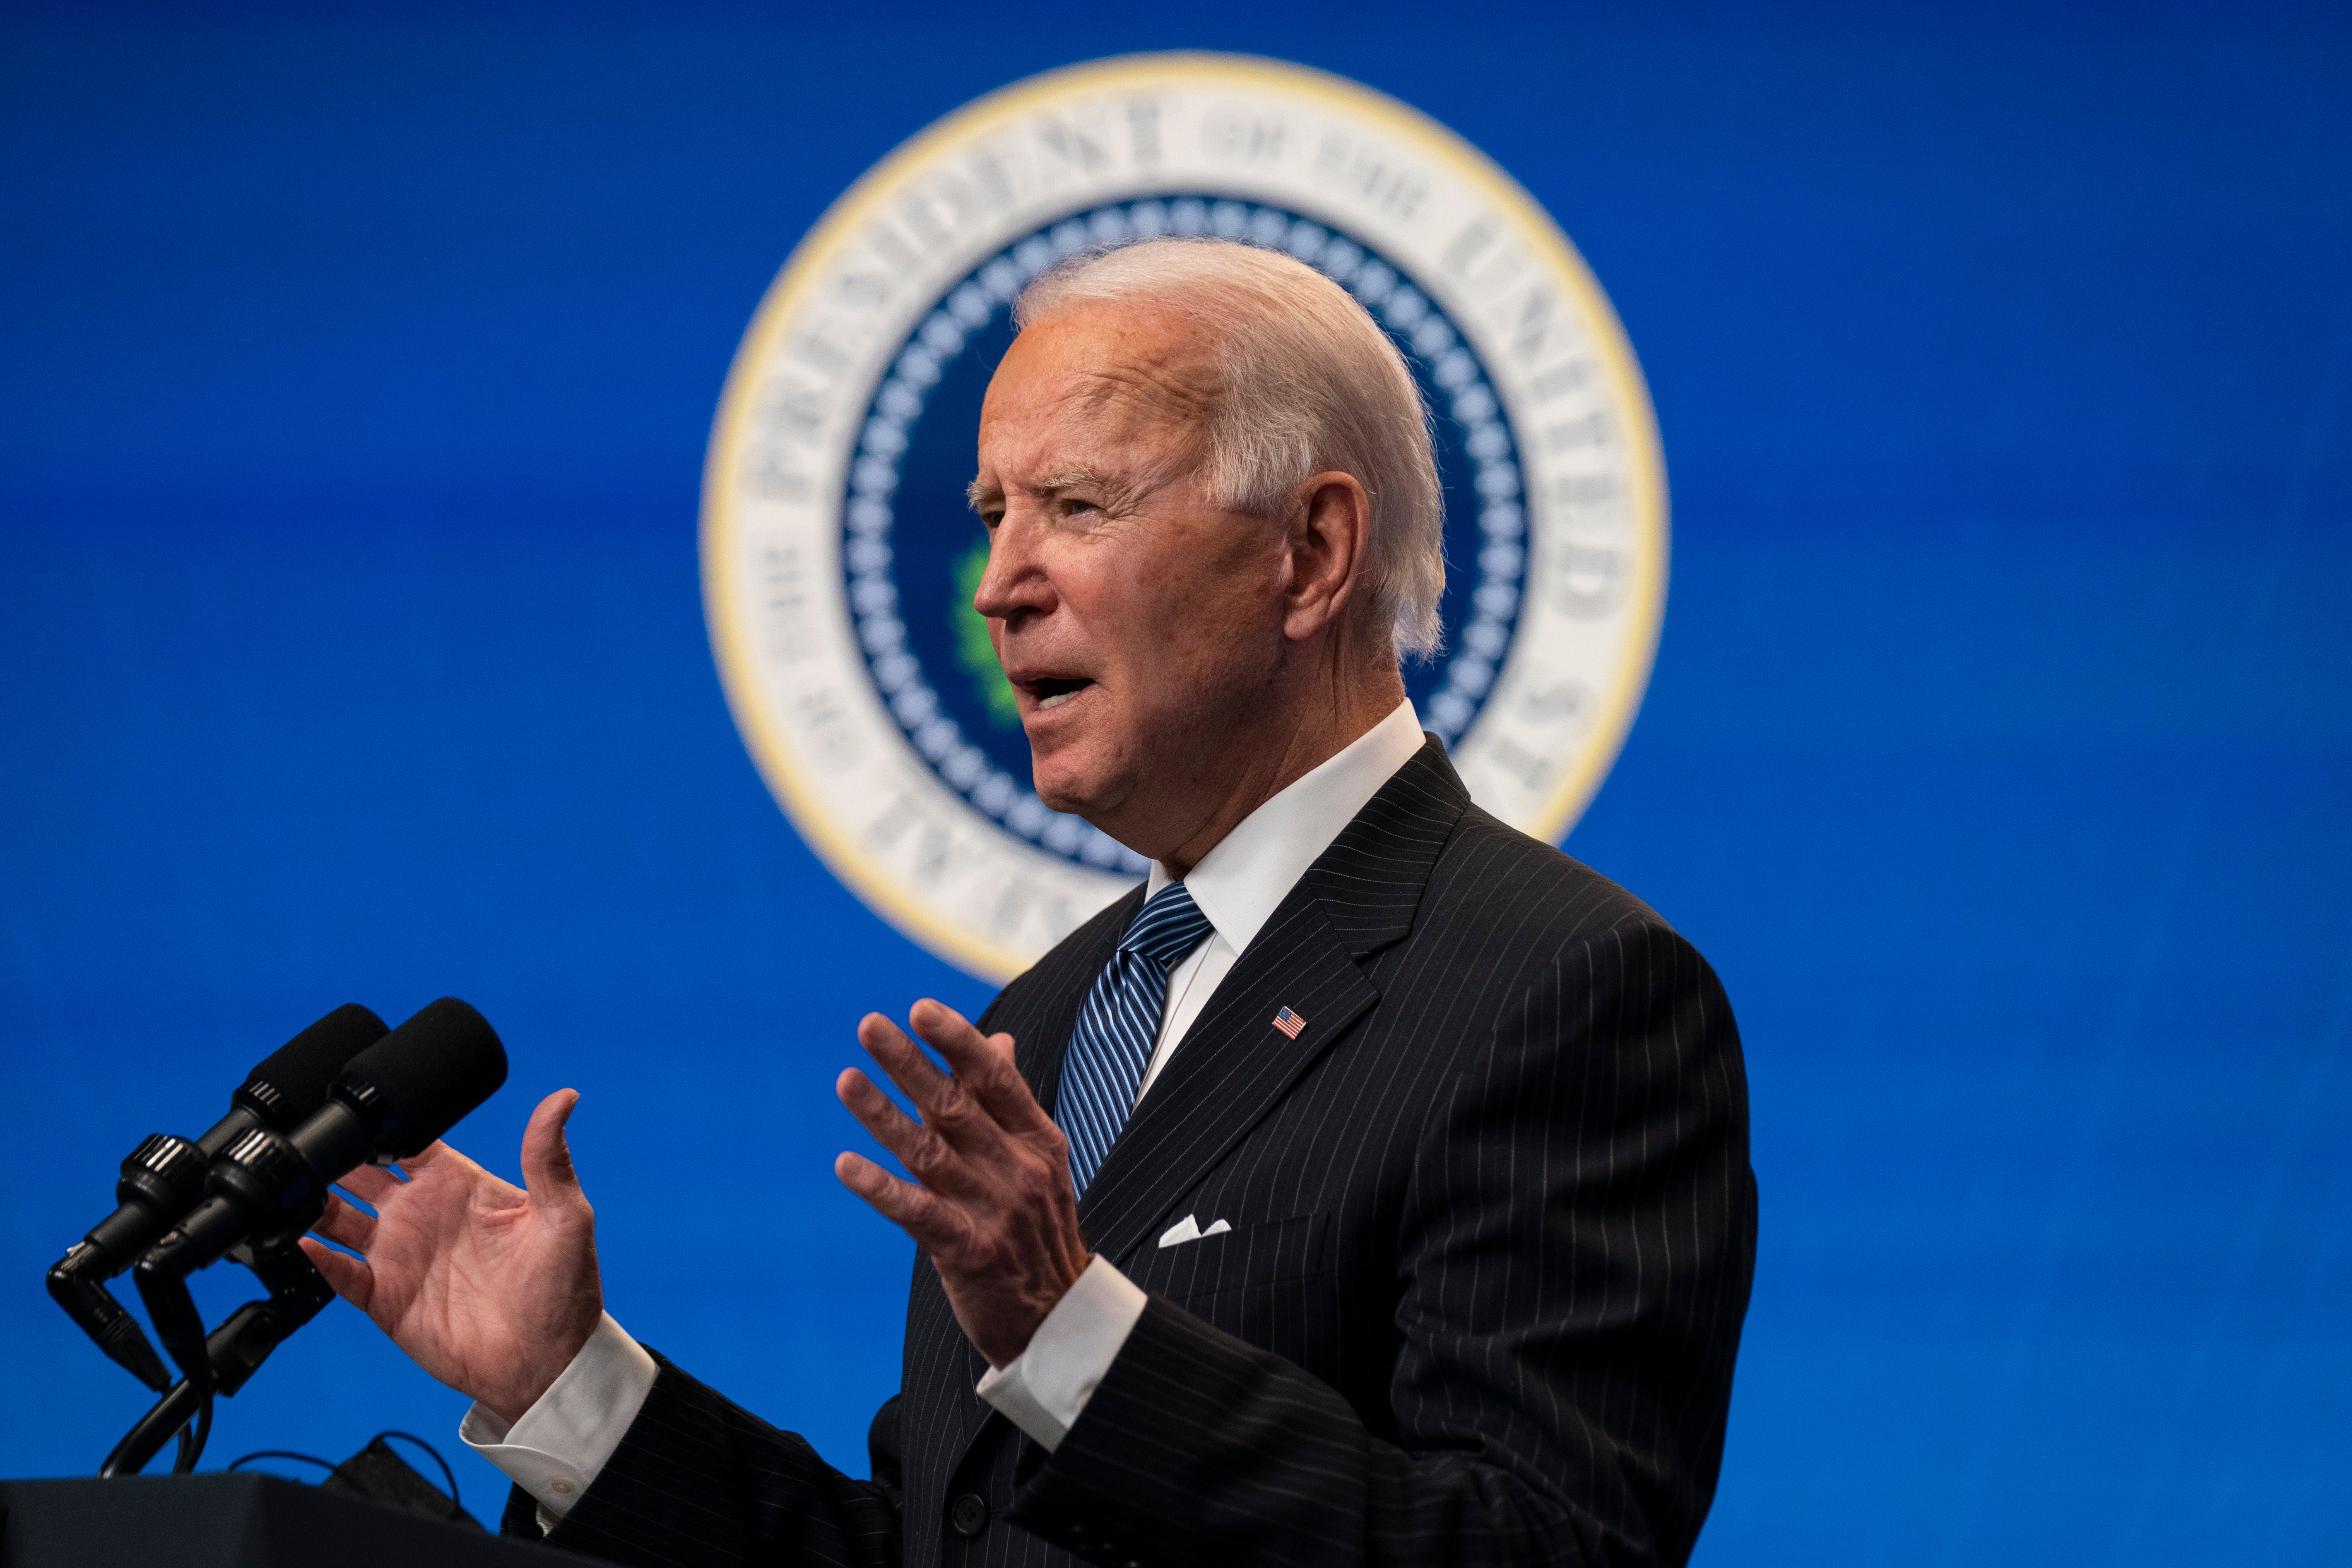 President Joe Biden answers questions from reporters in the South Court Auditorium at the White House